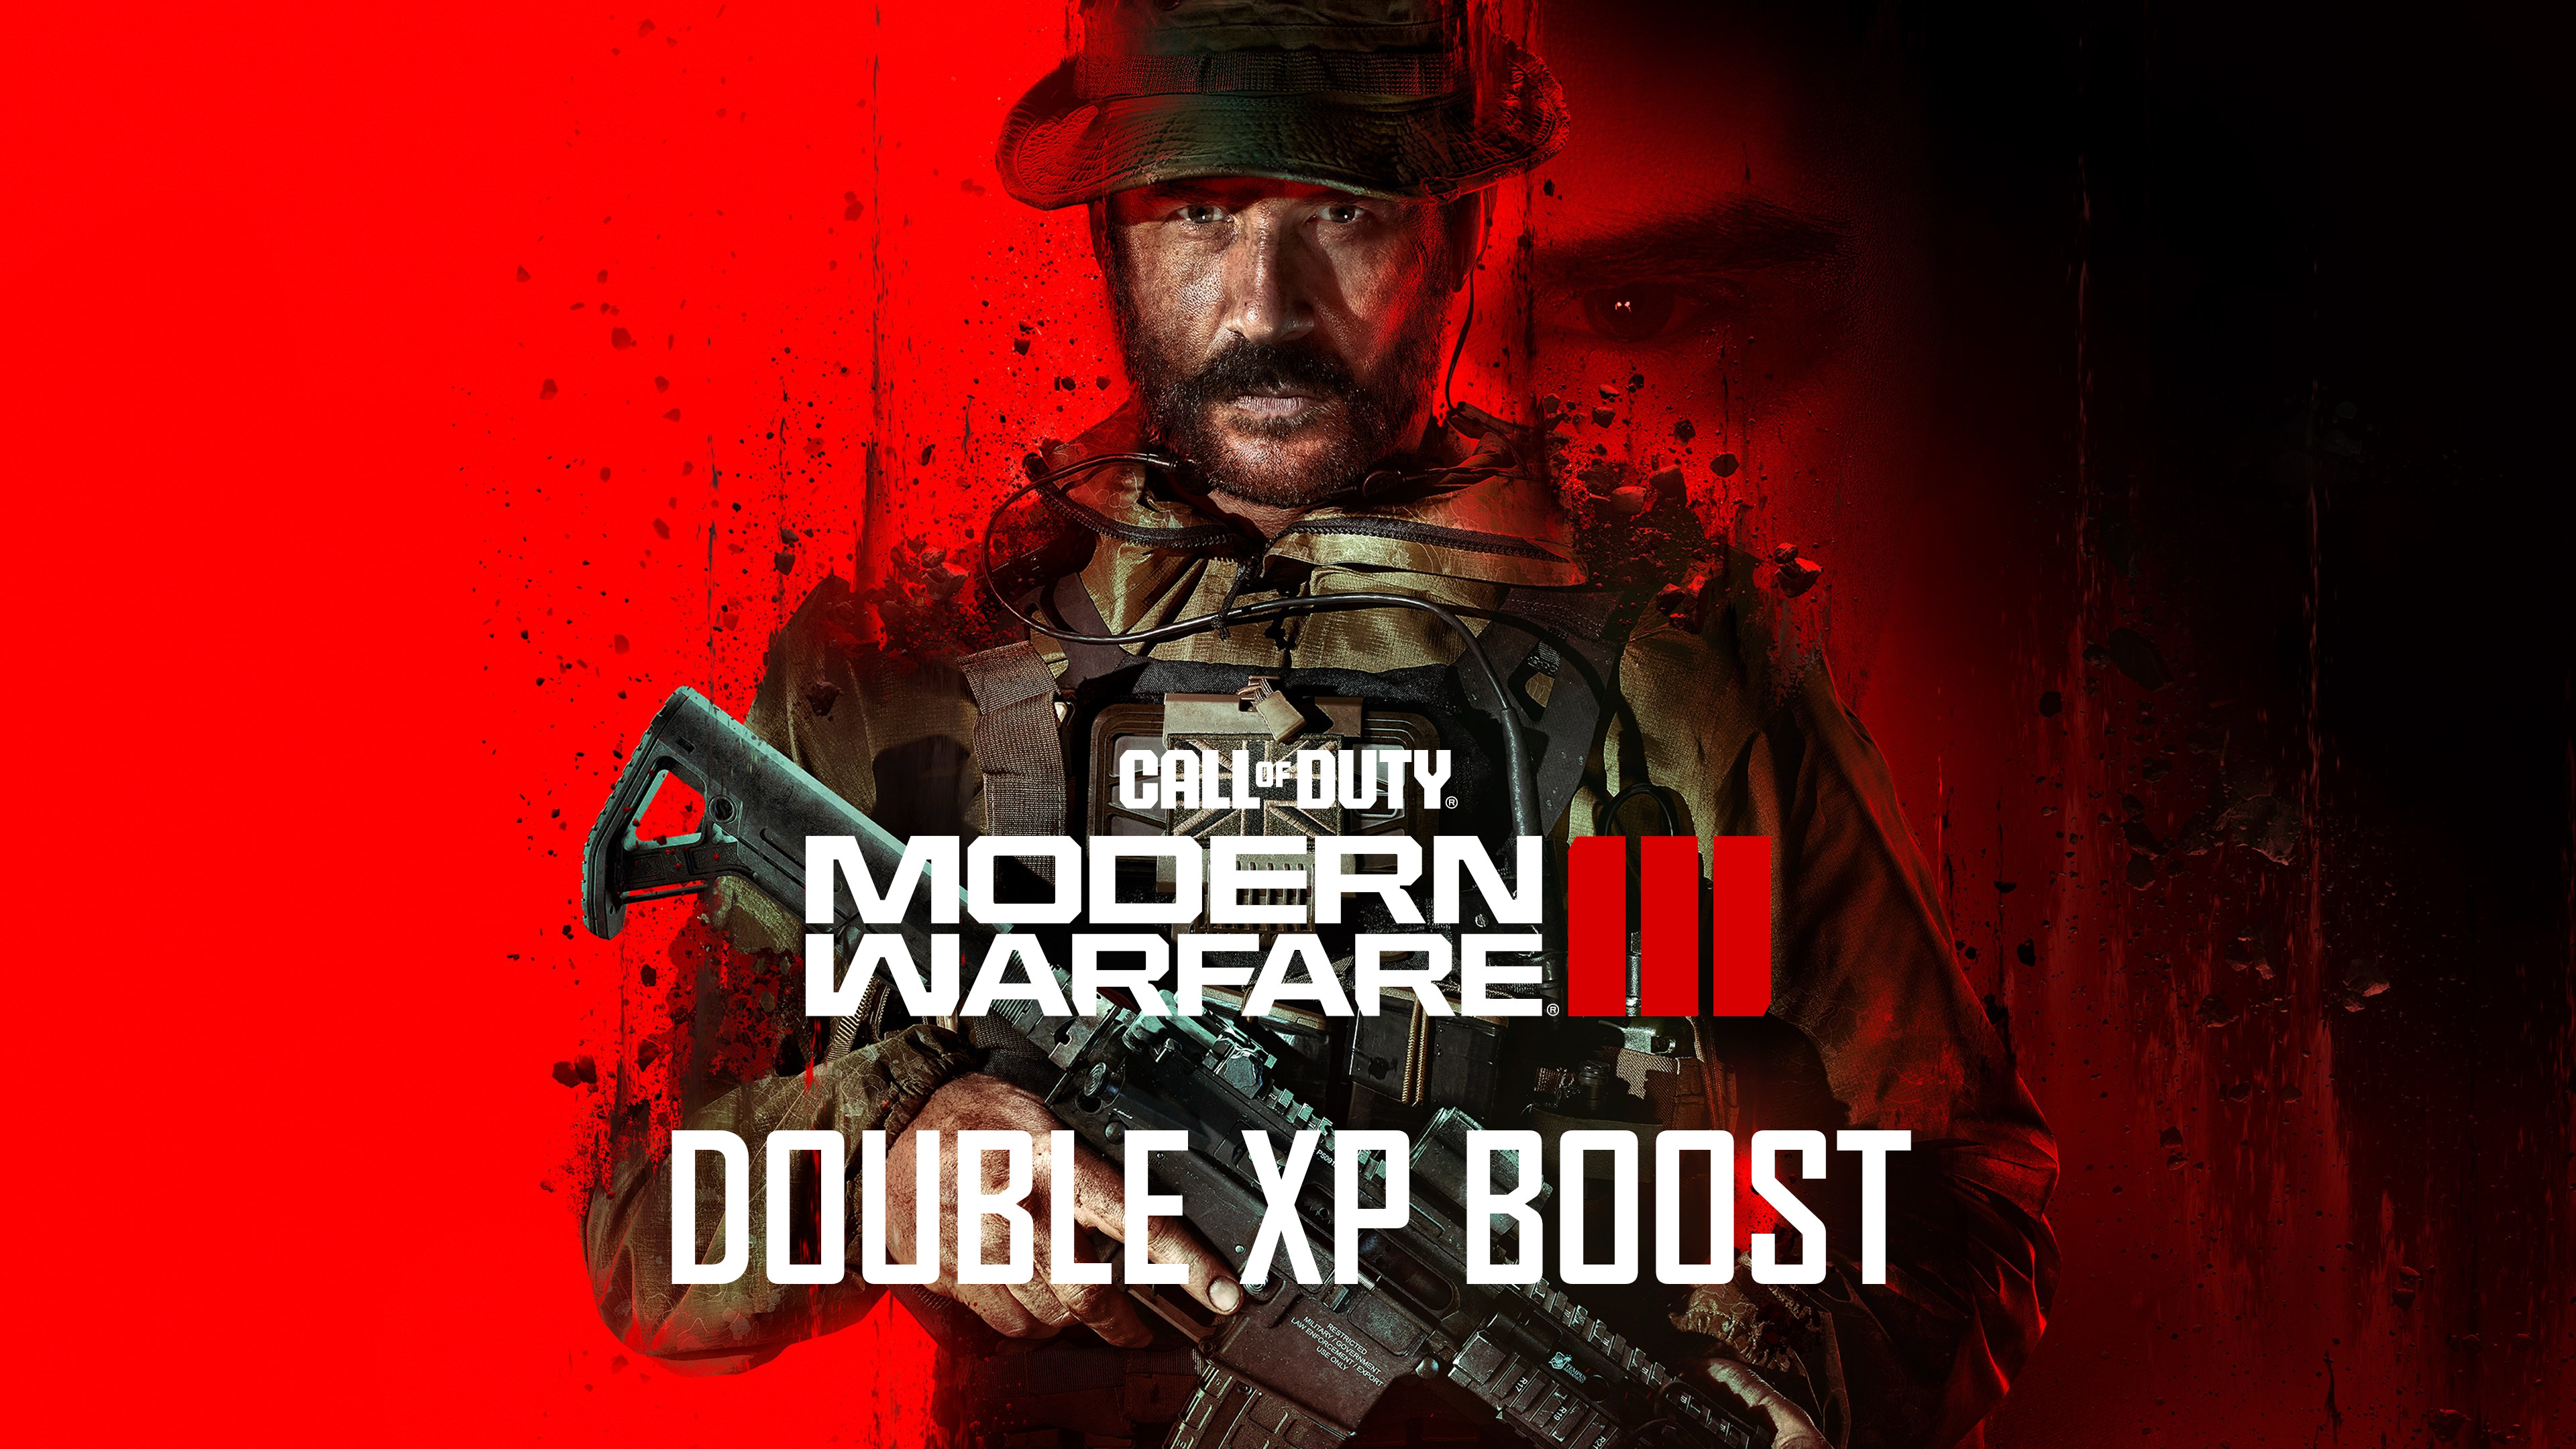 [$ 4.52] Call of Duty: Modern Warfare III - 5 Hours Double XP Boost PC/PS4/PS5/XBOX One/Series X|S CD Key